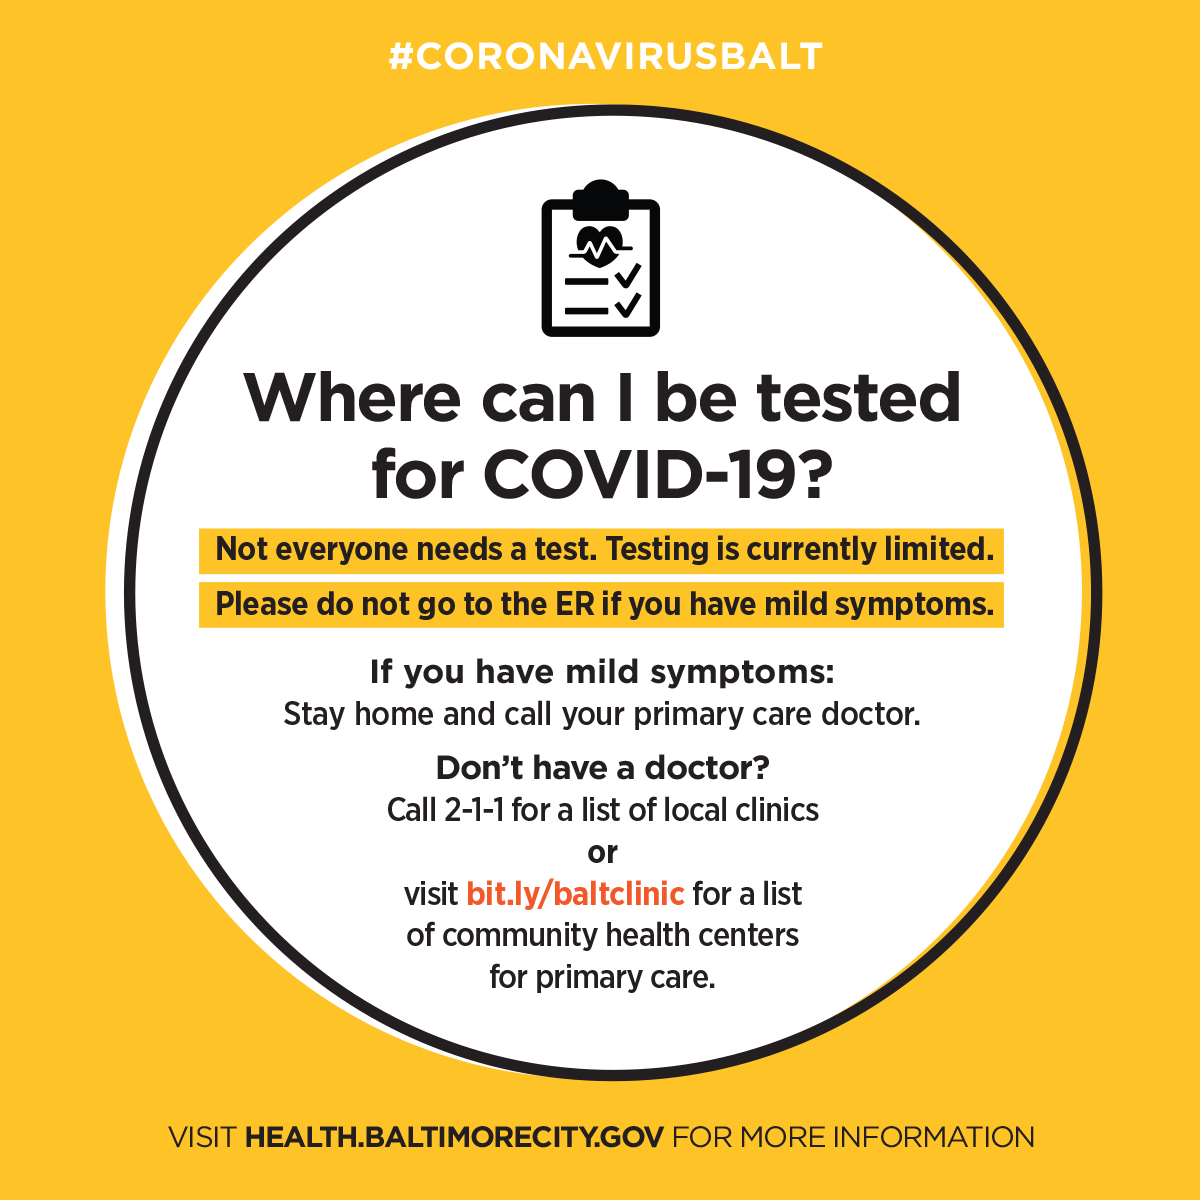 Call 2-1-1 or visit coronavirus.baltimorecity.gov for a list of where to be tested